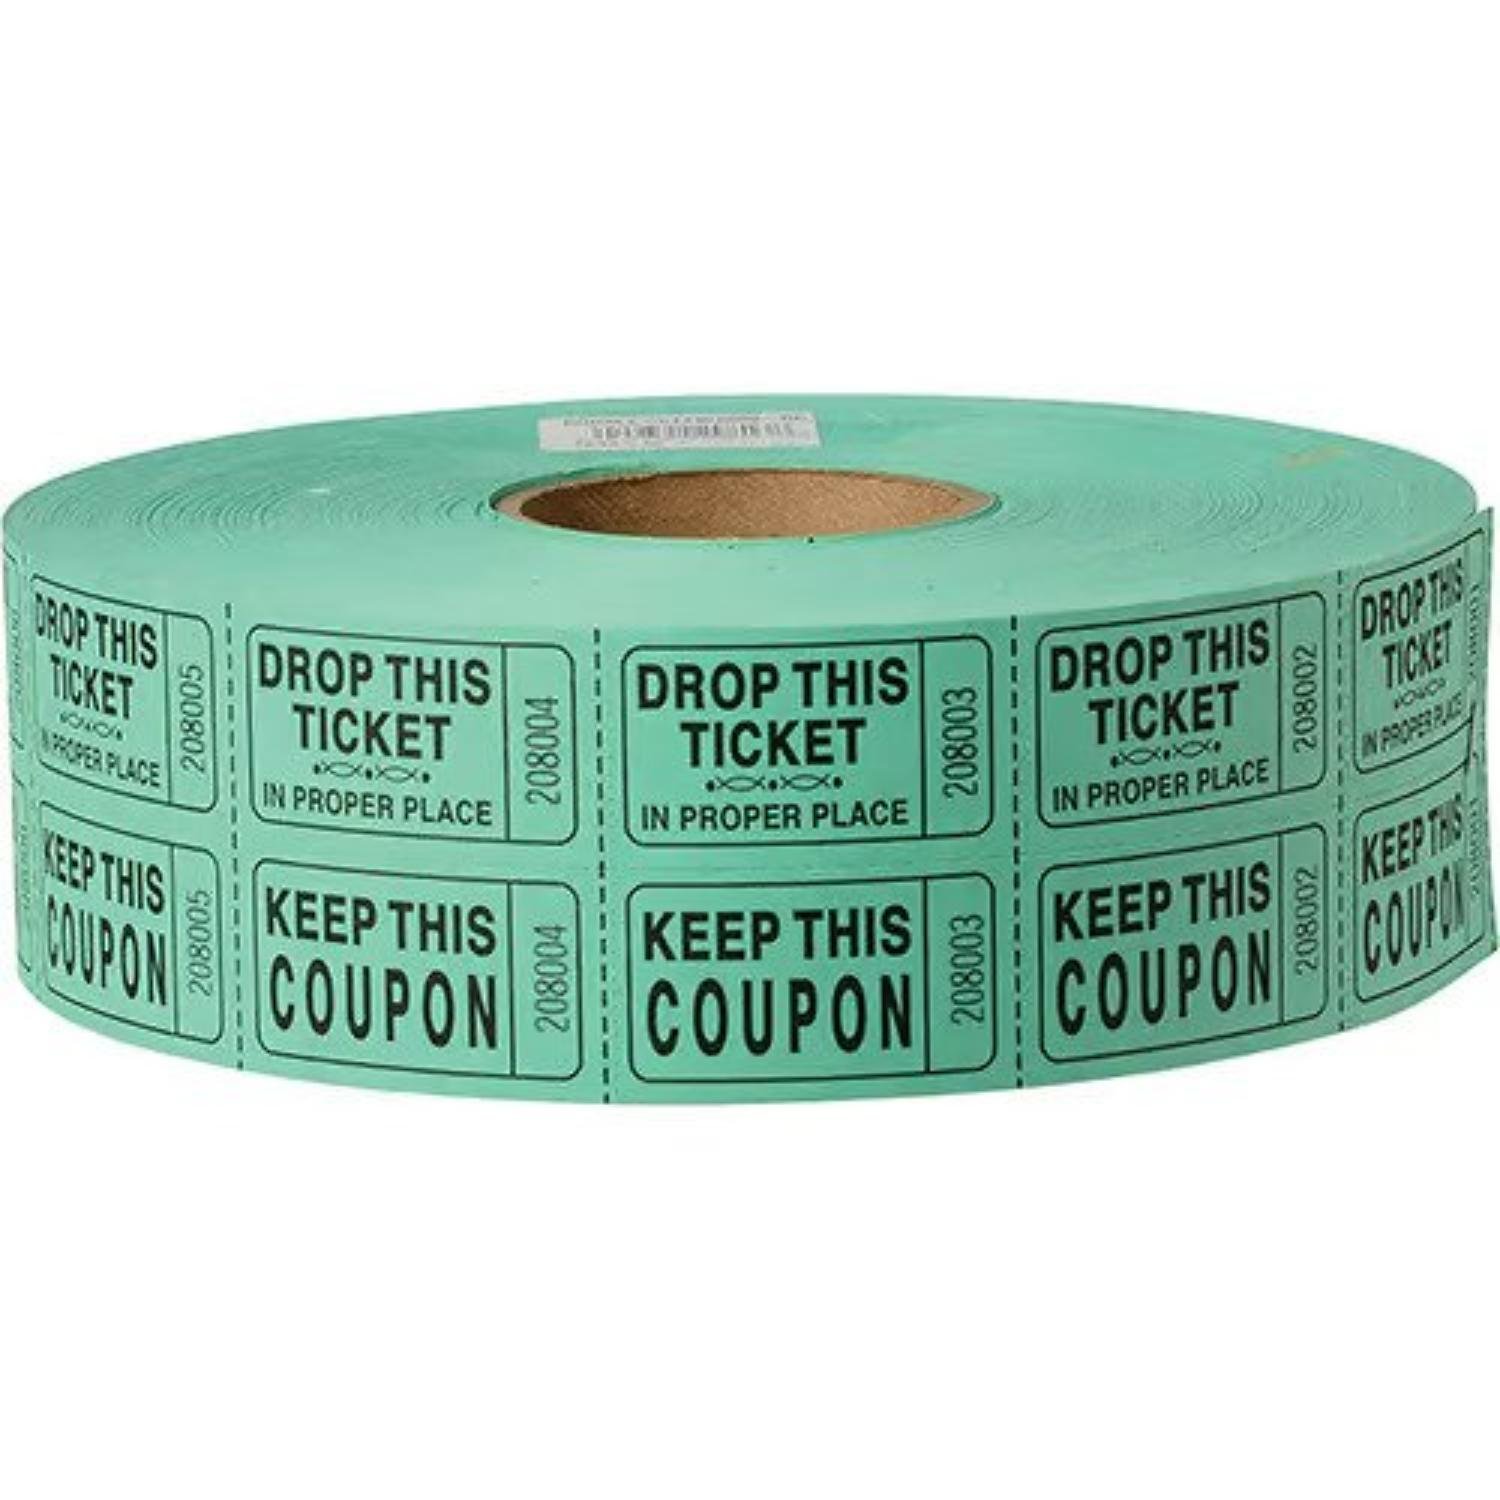 Double Ticket Green - 2000 Tickets